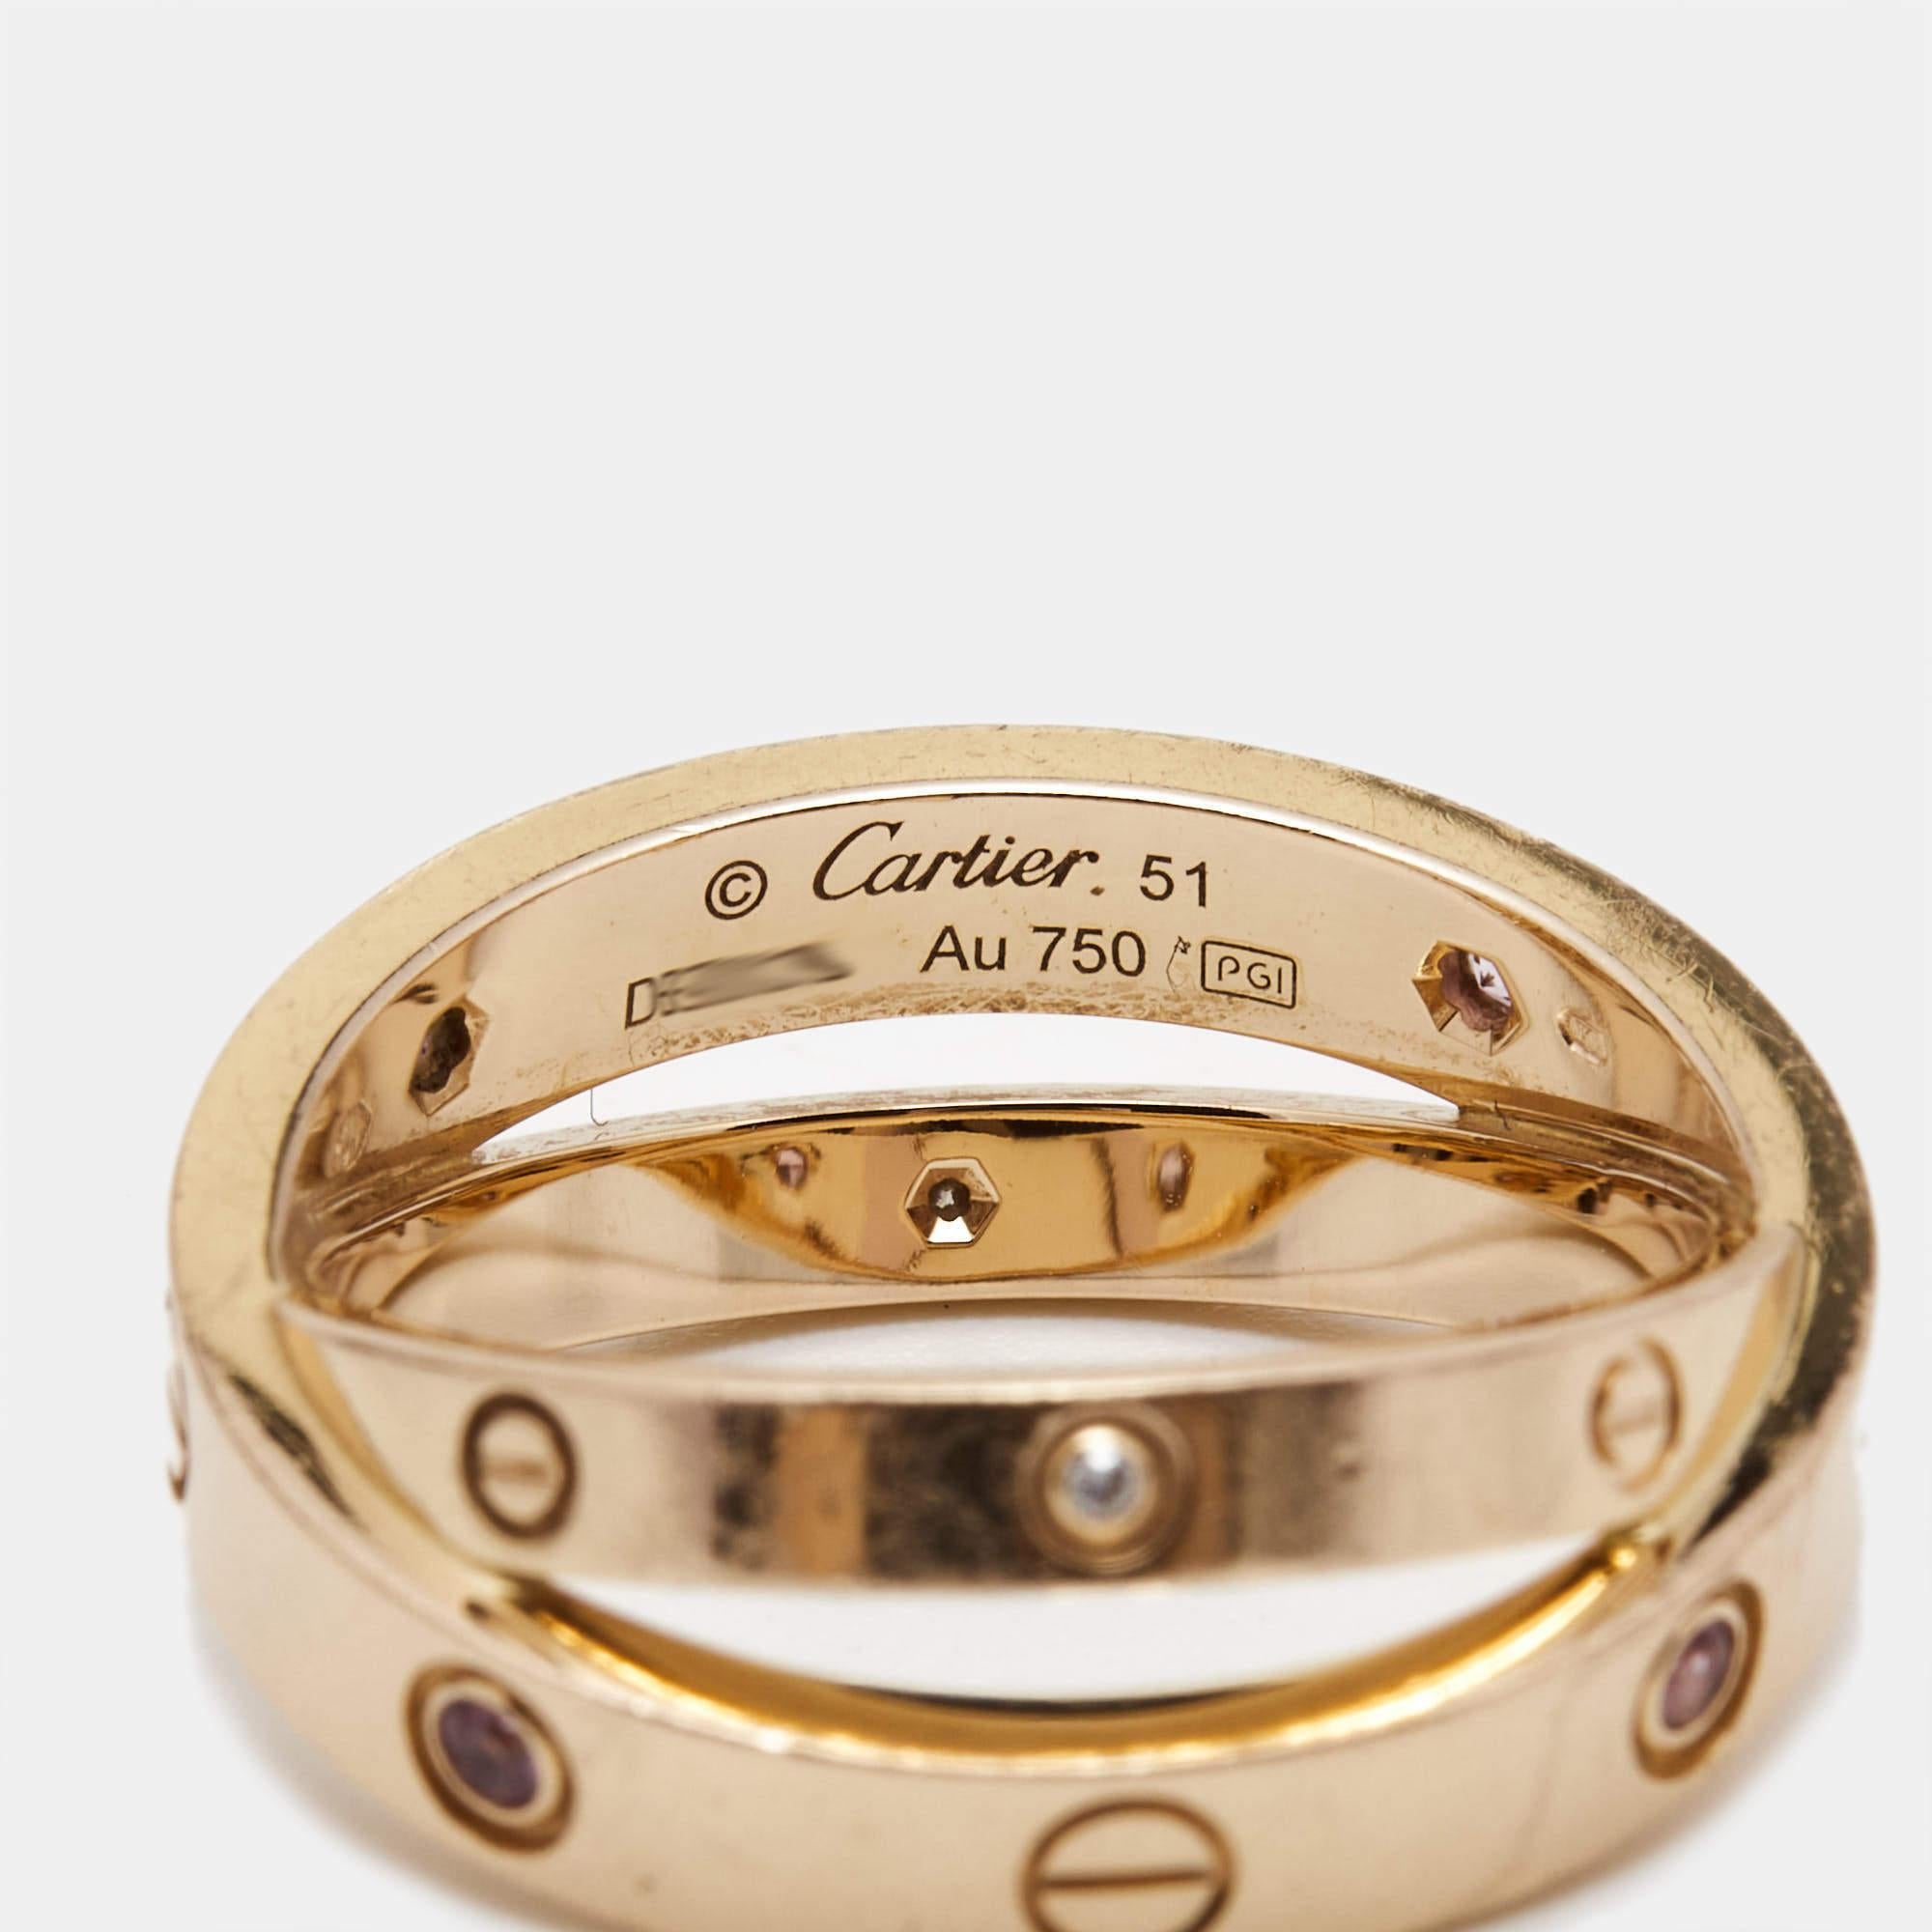 Contemporary Cartier Love 2 Diamond 4 Pink Sapphire 18K Rose Gold Double Band Ring Size 51